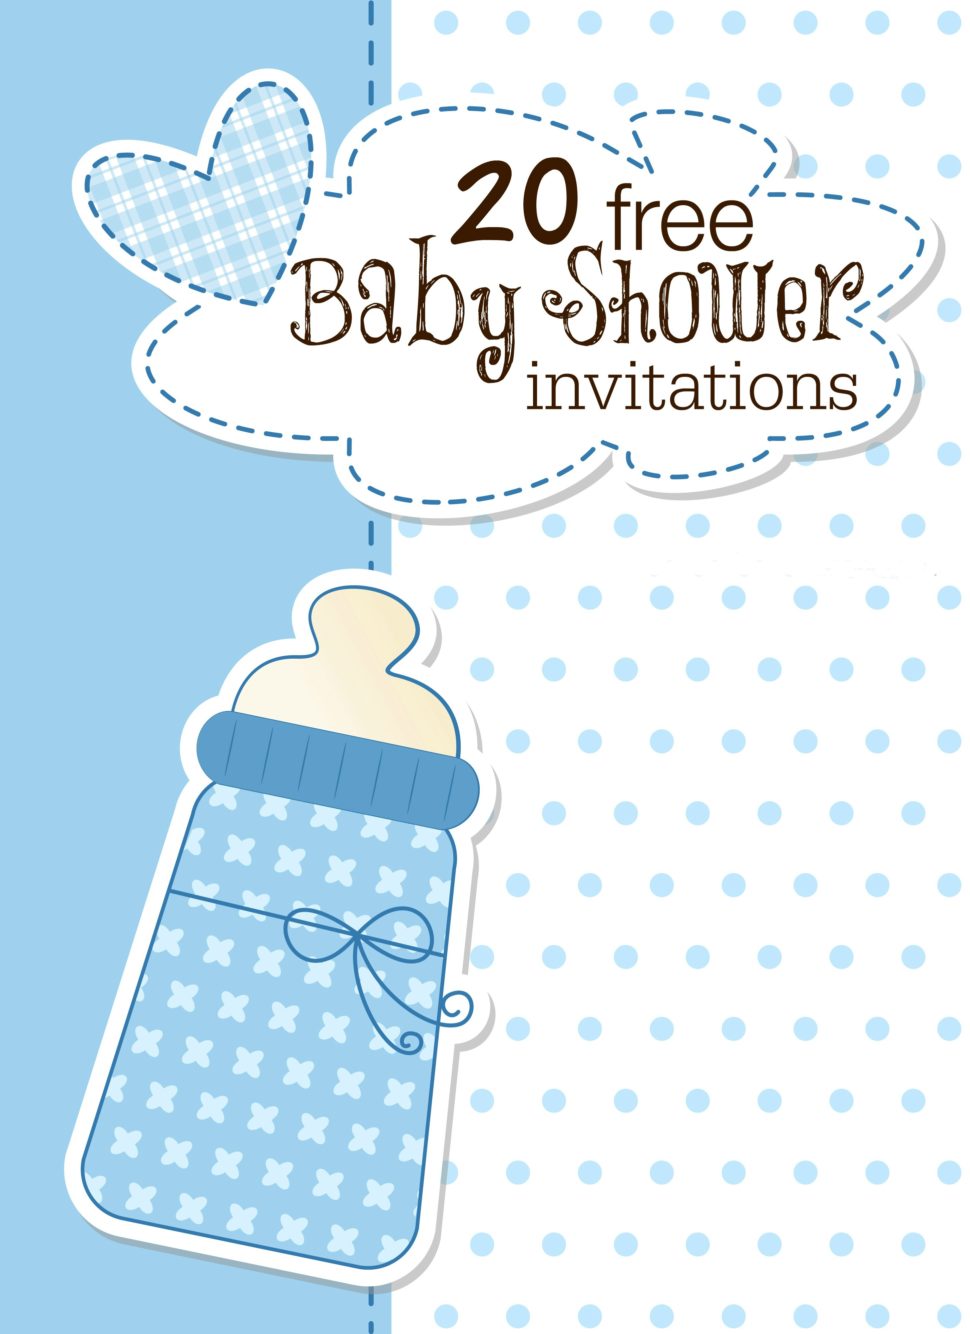 Medium Size of Baby Shower:free Printable Baby Shower Games Elegant Baby Shower Baby Shower Centerpiece Ideas For Boys Nursery For Girls Nautical Baby Shower Invitations For Boys Baby Girl Themes For Bedroom Baby Shower Ideas Baby Shower Decorations Themes For Baby Girl Nursery